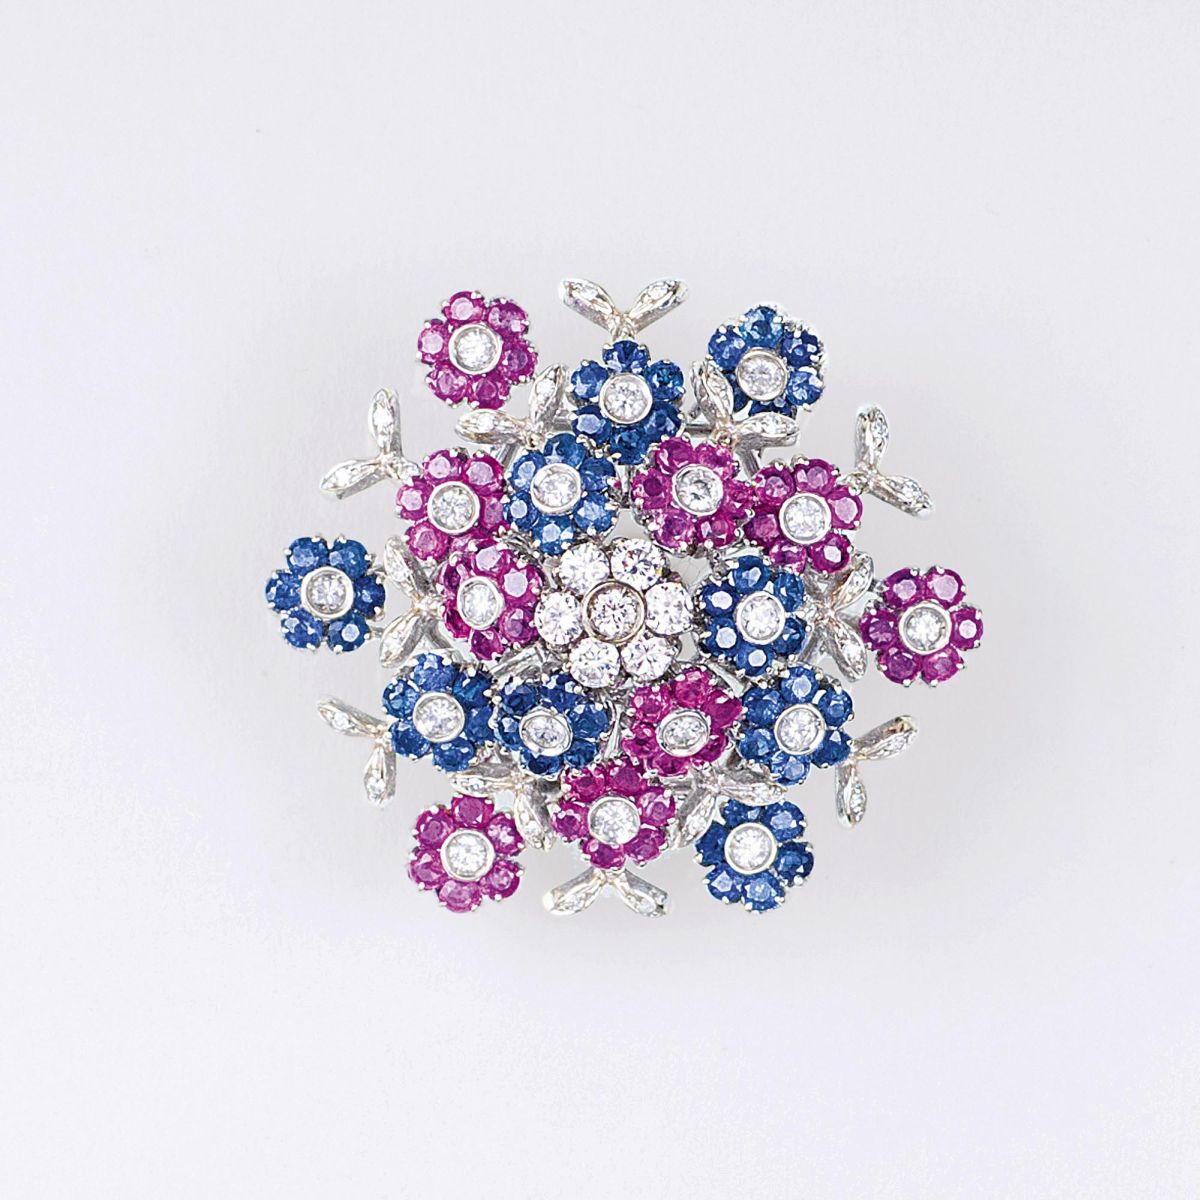 A Vintage Flower Brooch with Sapphires, Rubies and Diamonds